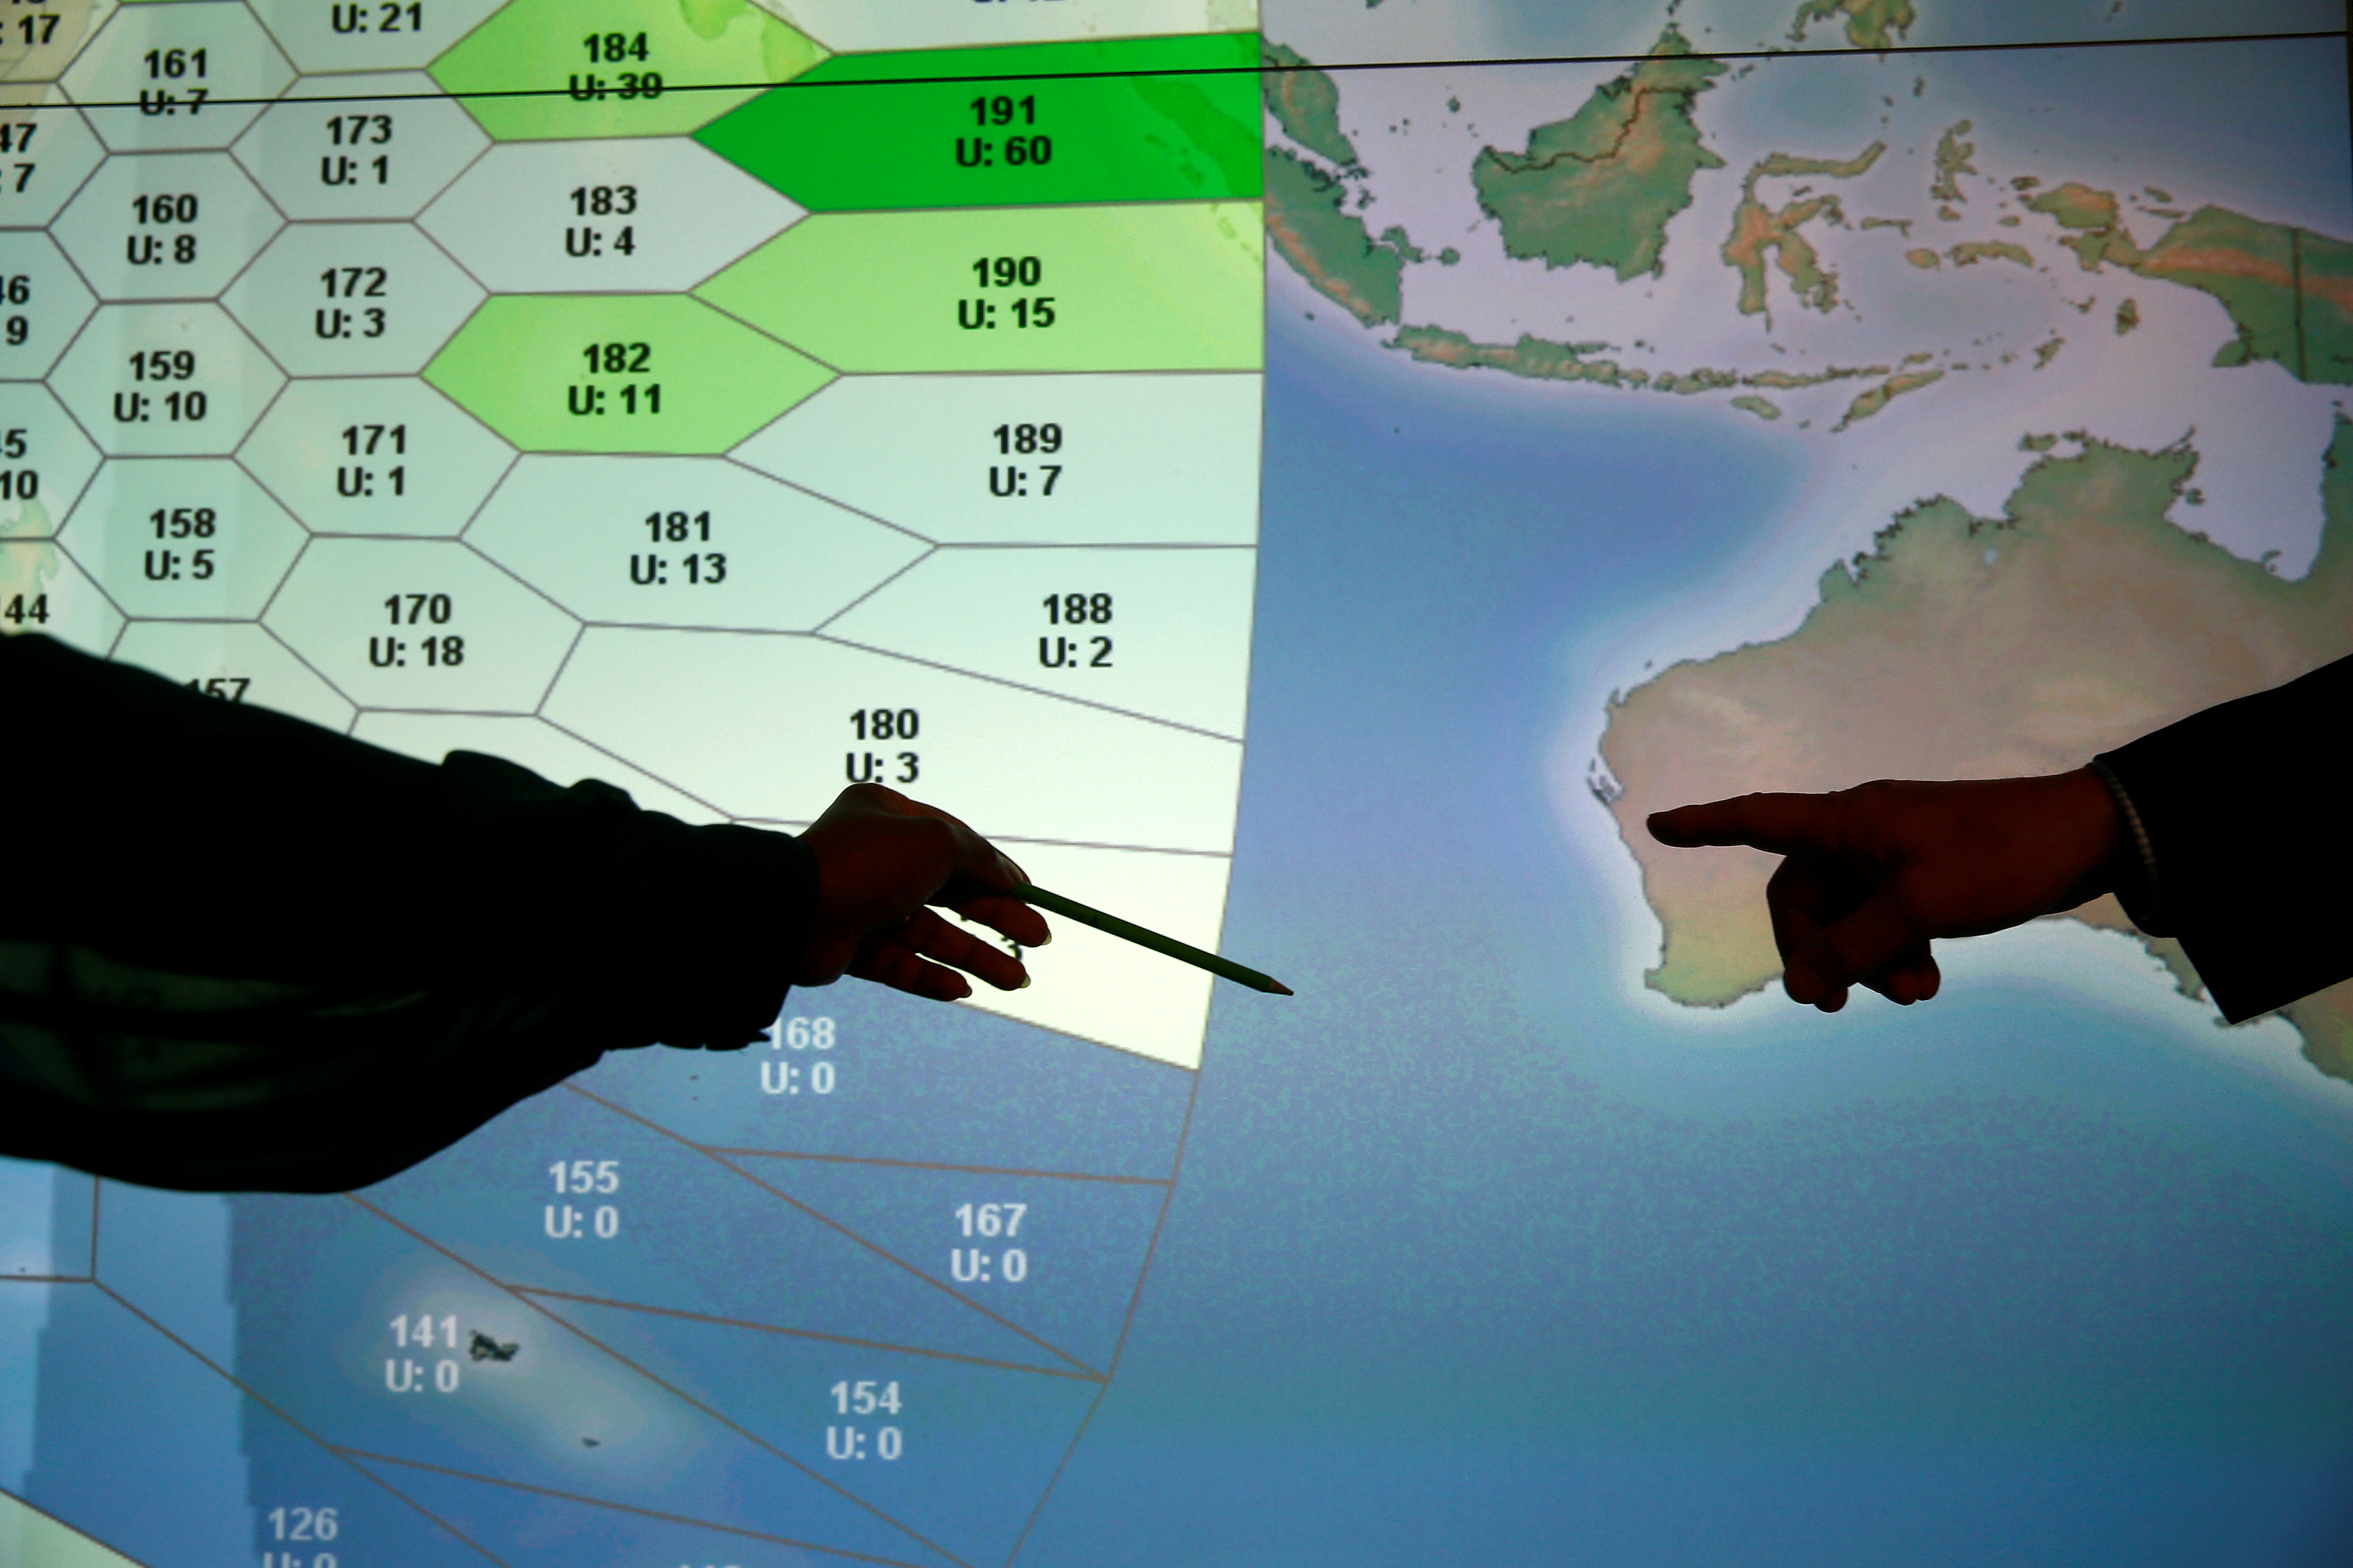 Member of staff at satellite communications company Inmarsat point to a section of the screen showing the southern Indian Ocean to the west of Australia, at their headquarters in London